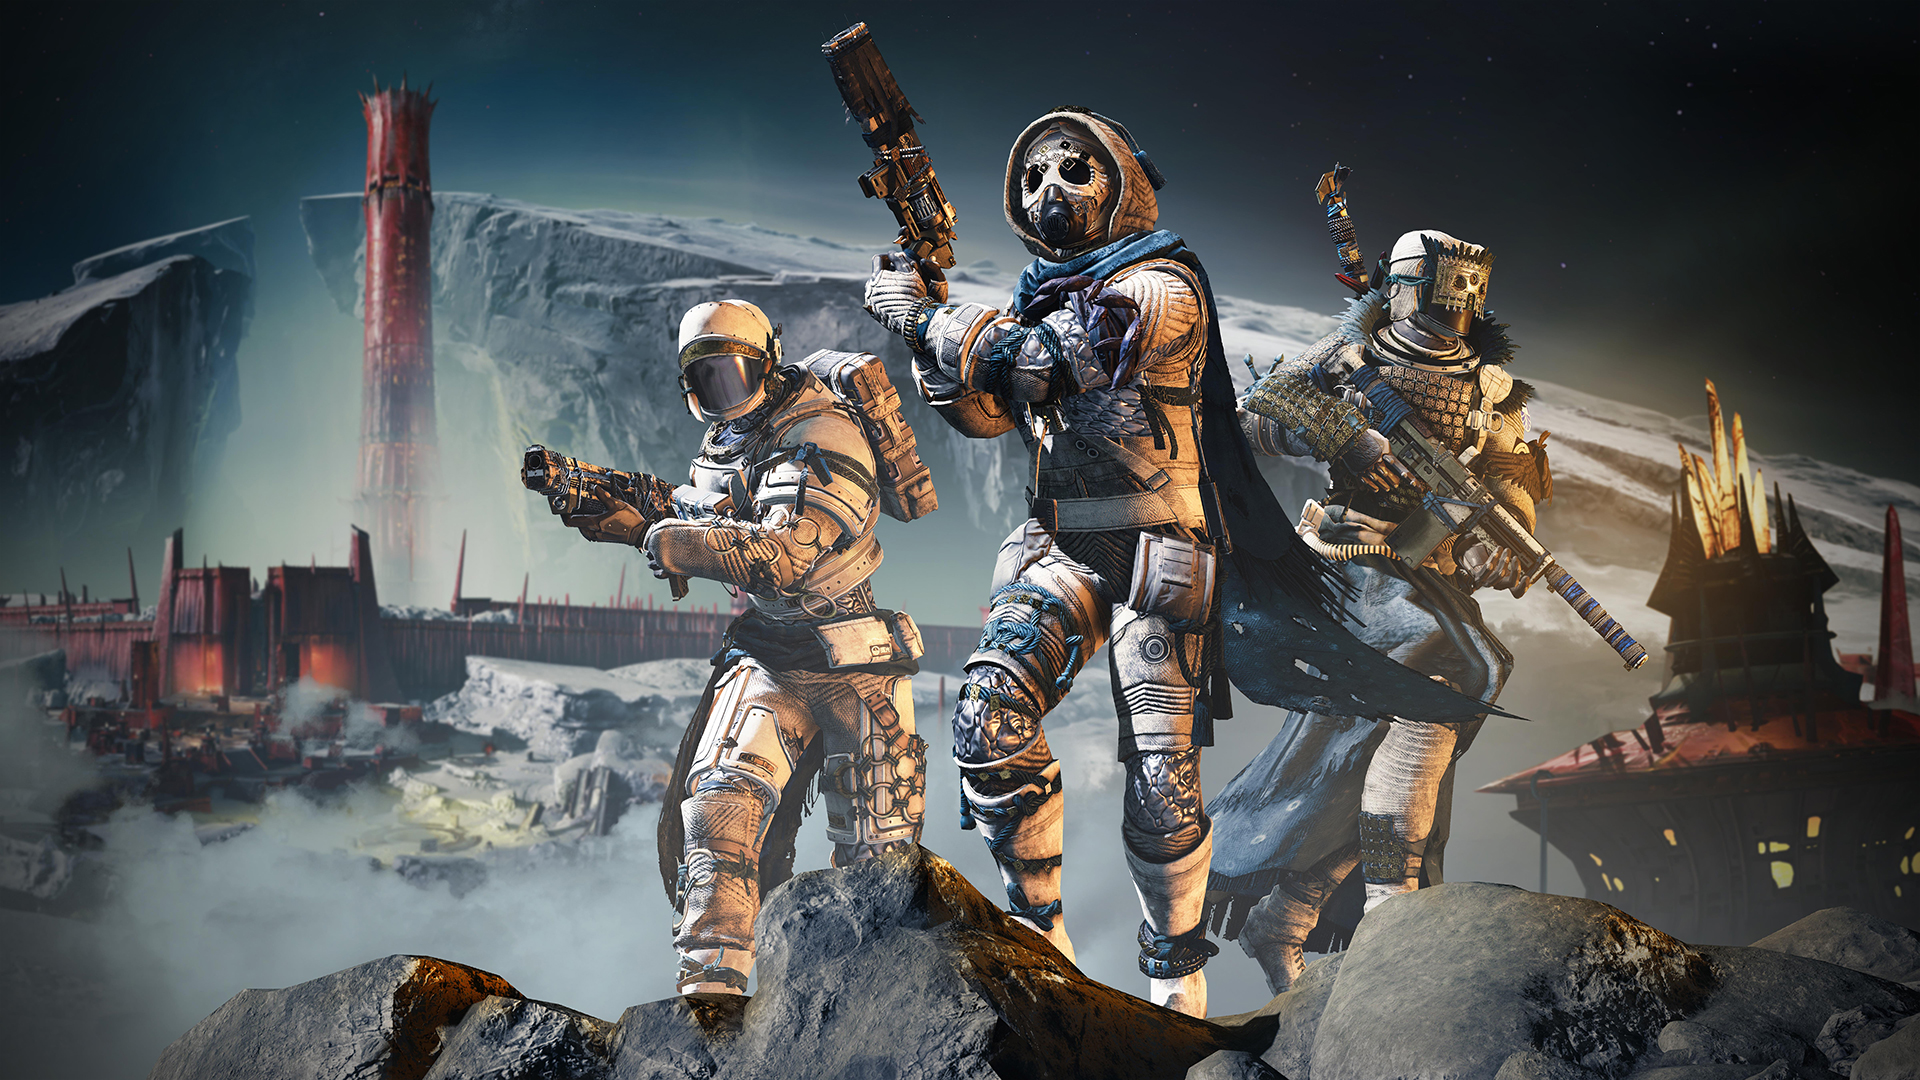 A destiny fire team stands on a lunar cliff with the Red Keep behind them in the distance.